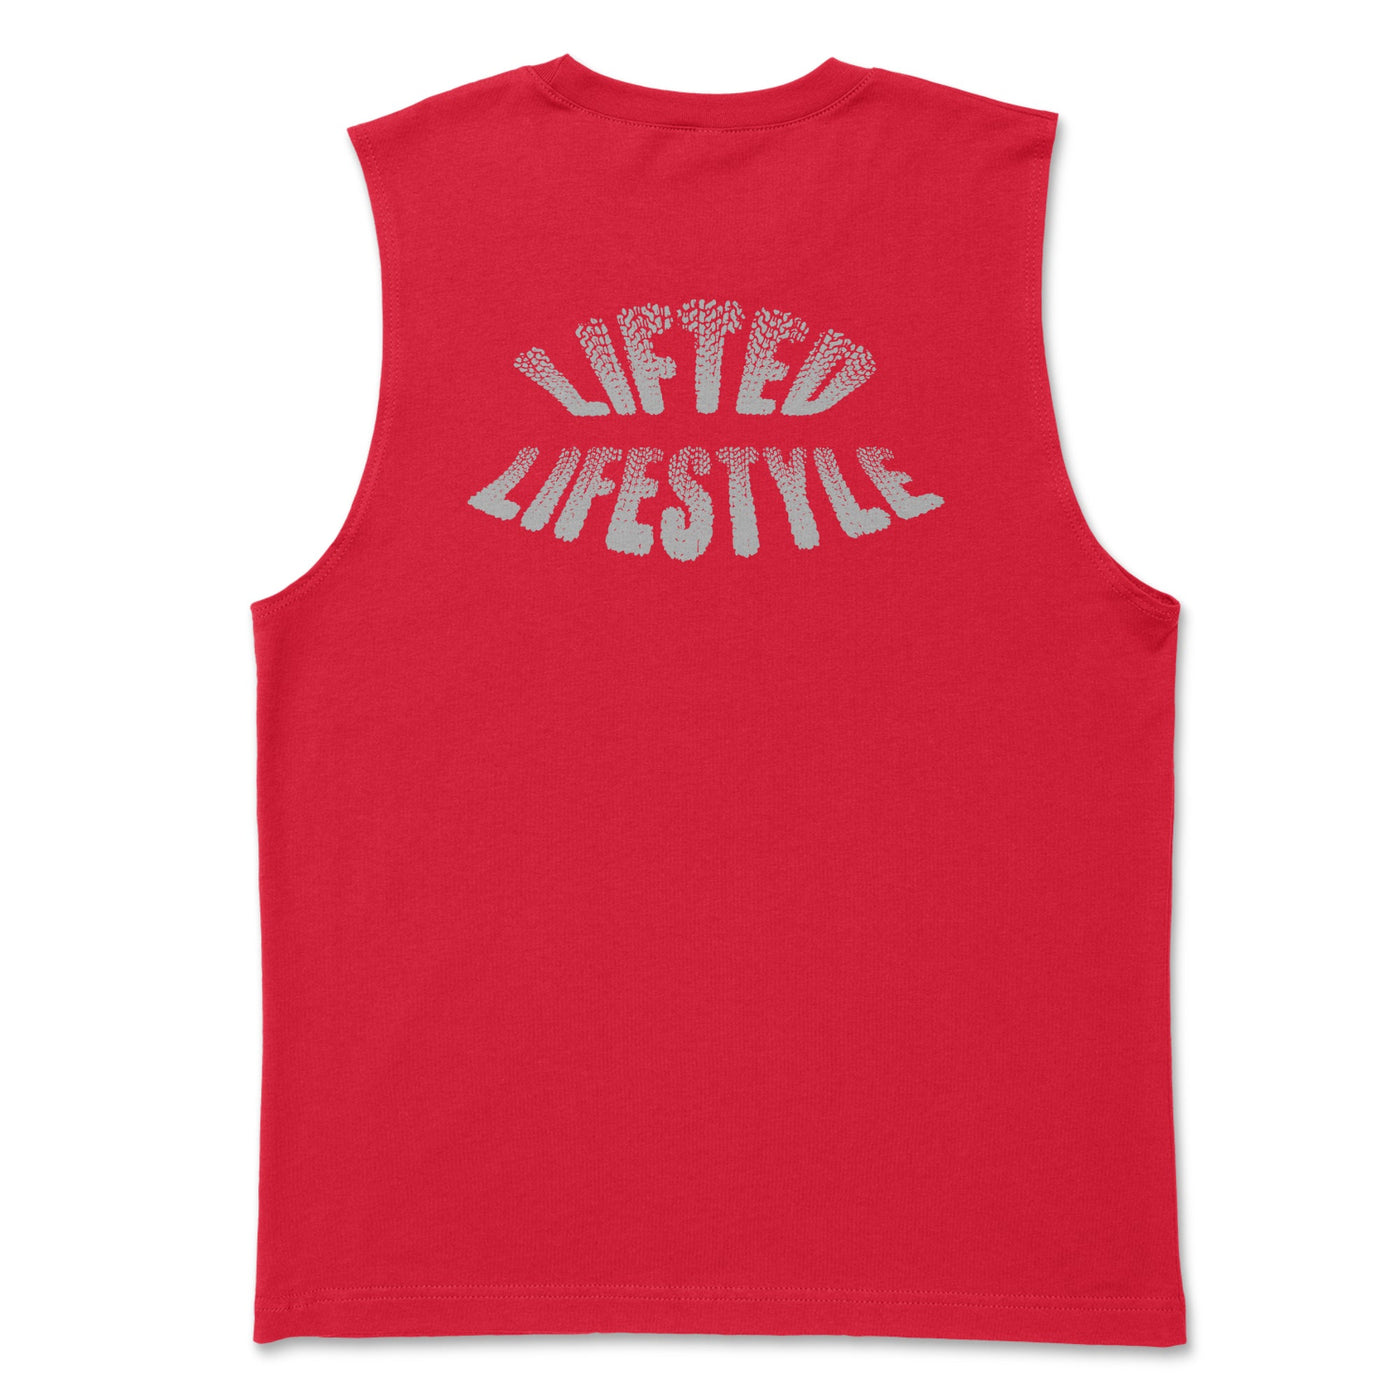 Lifted Lifestyle Tire Tread Muscle Tank - Goats Trail Off-Road Apparel Company